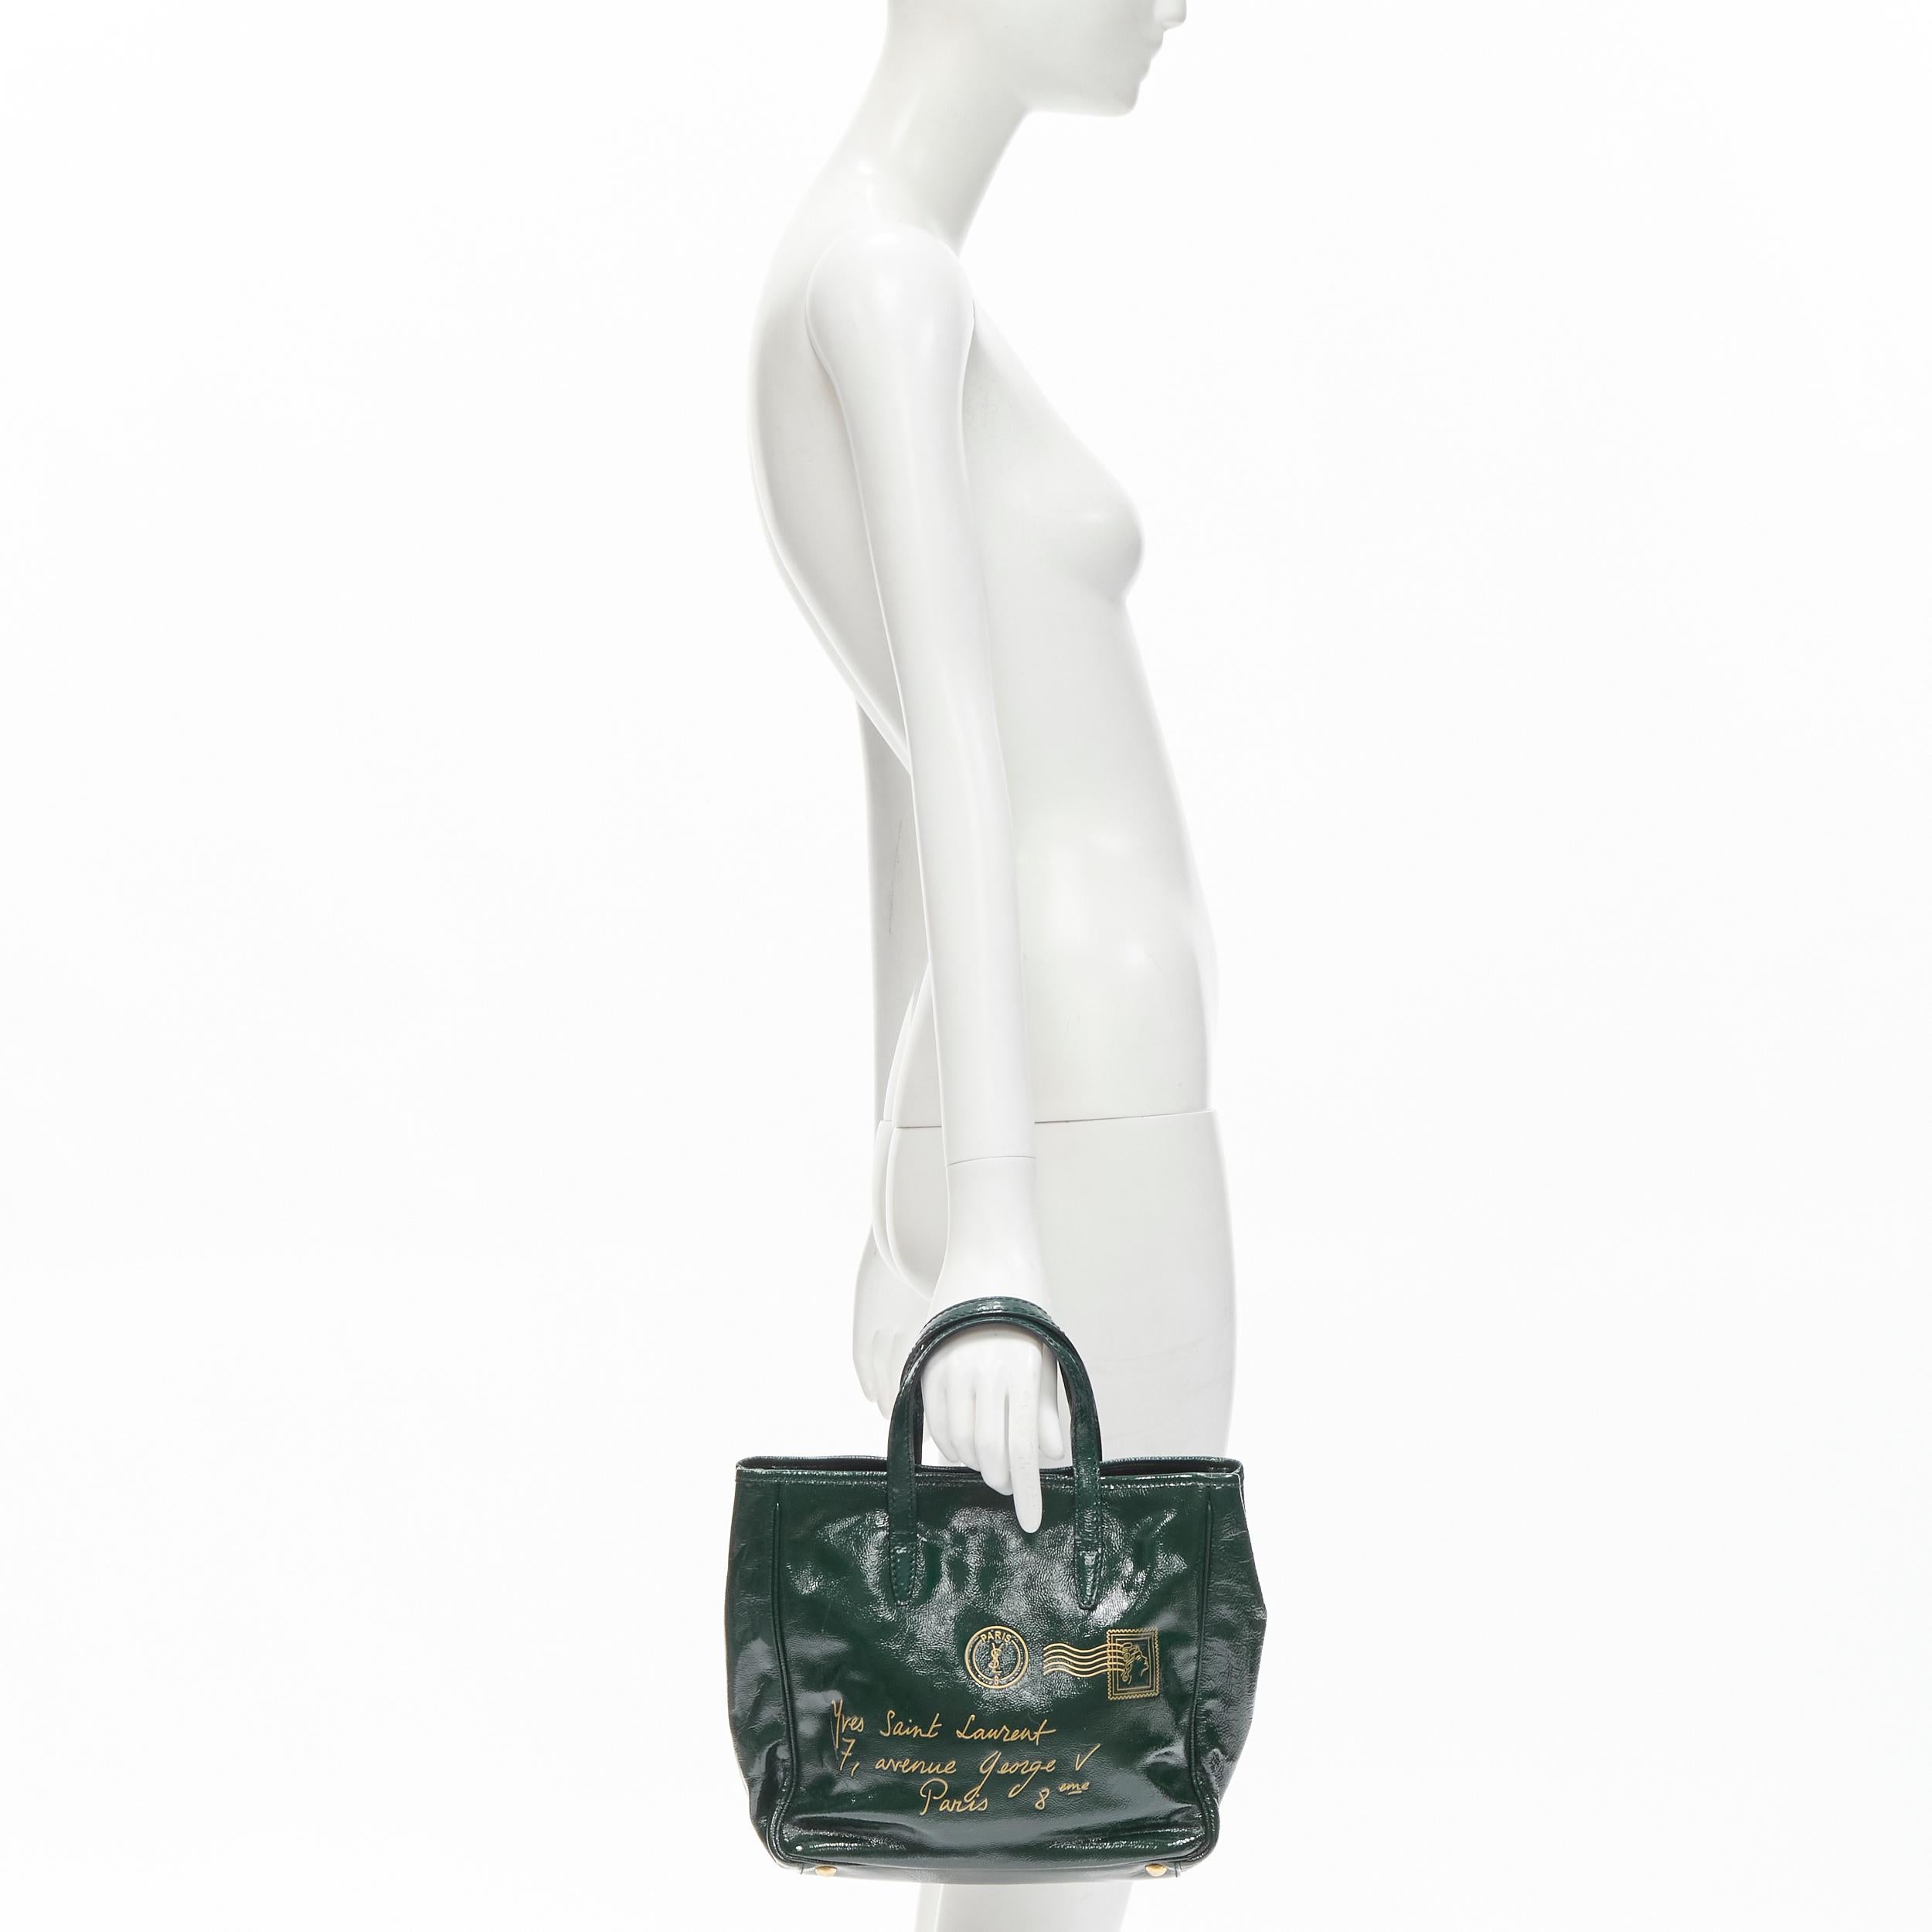 YVES SAINT LAURENT Small Y-Mail green patent gold print tote bag
Brand: Yves Saint Laurent
Model: 197699 002122
Collection: Y-Mail 
Material: Patent Leather
Color: Green
Pattern: Solid
Closure: Magnet
Extra Detail: Dark green patent leather upper.